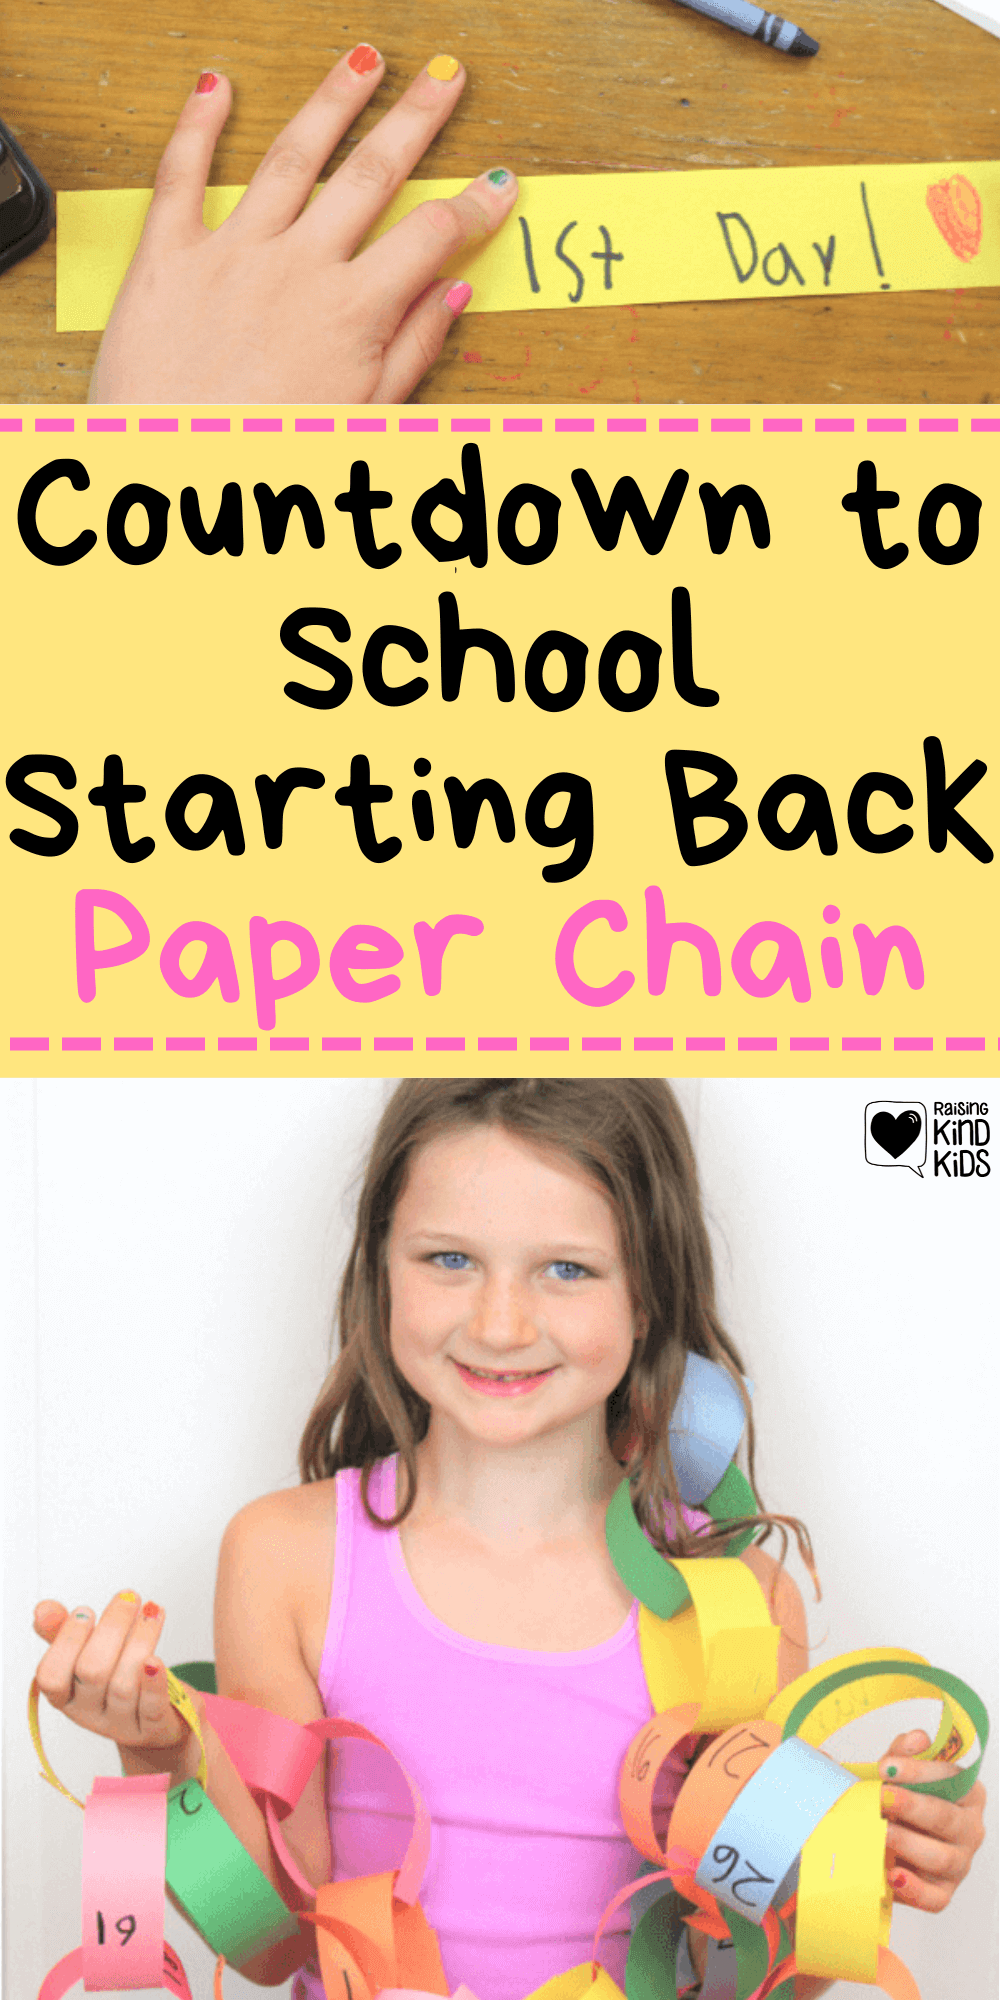 Get kids excited for school with this countdown to back to school paper chain. It's one of the perfect summer activities for kids as summer vacation ends and fall begins. Generate back to school excitement with this back to school craft #backtoschool #paperchain #countdown #countdowncalendar #paperchaincountdown #backtoschoolactivities #summeractivities #backtoschoolexcitement 